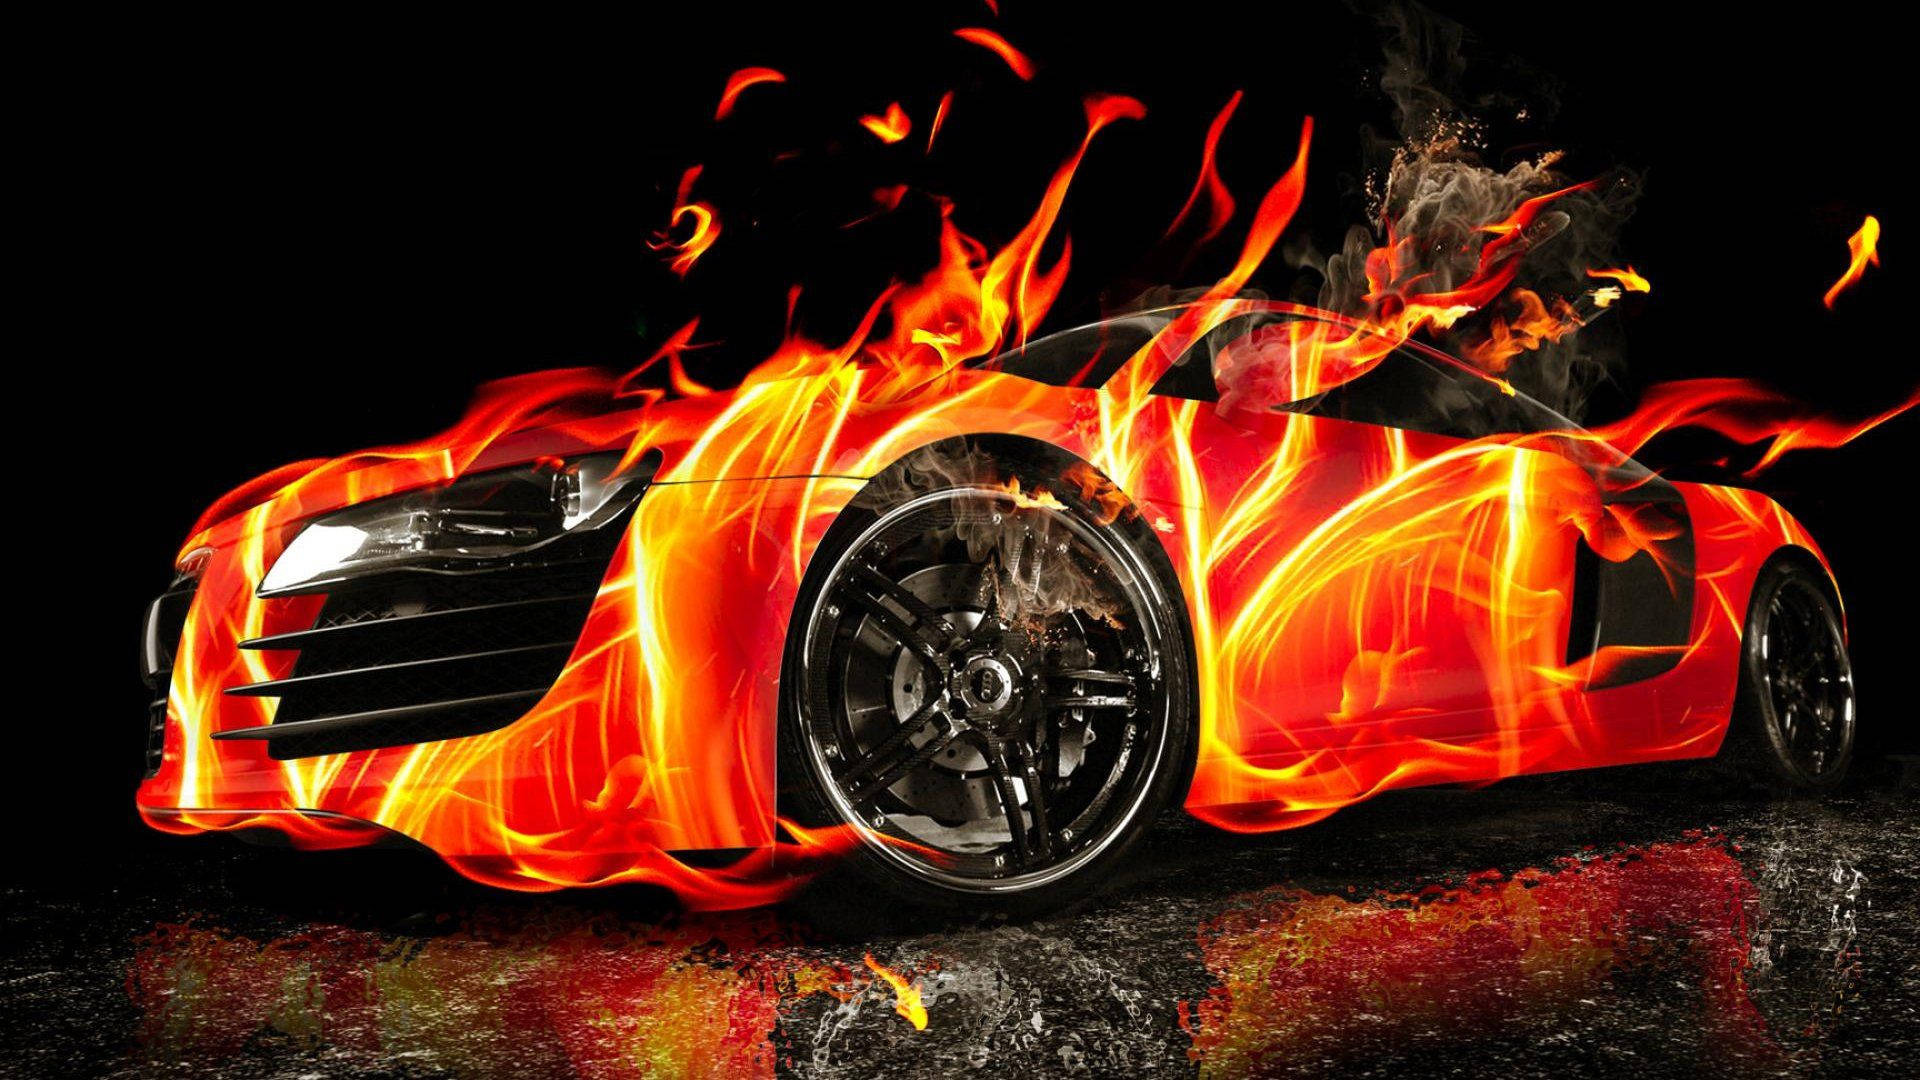 awesome backgrounds of cars